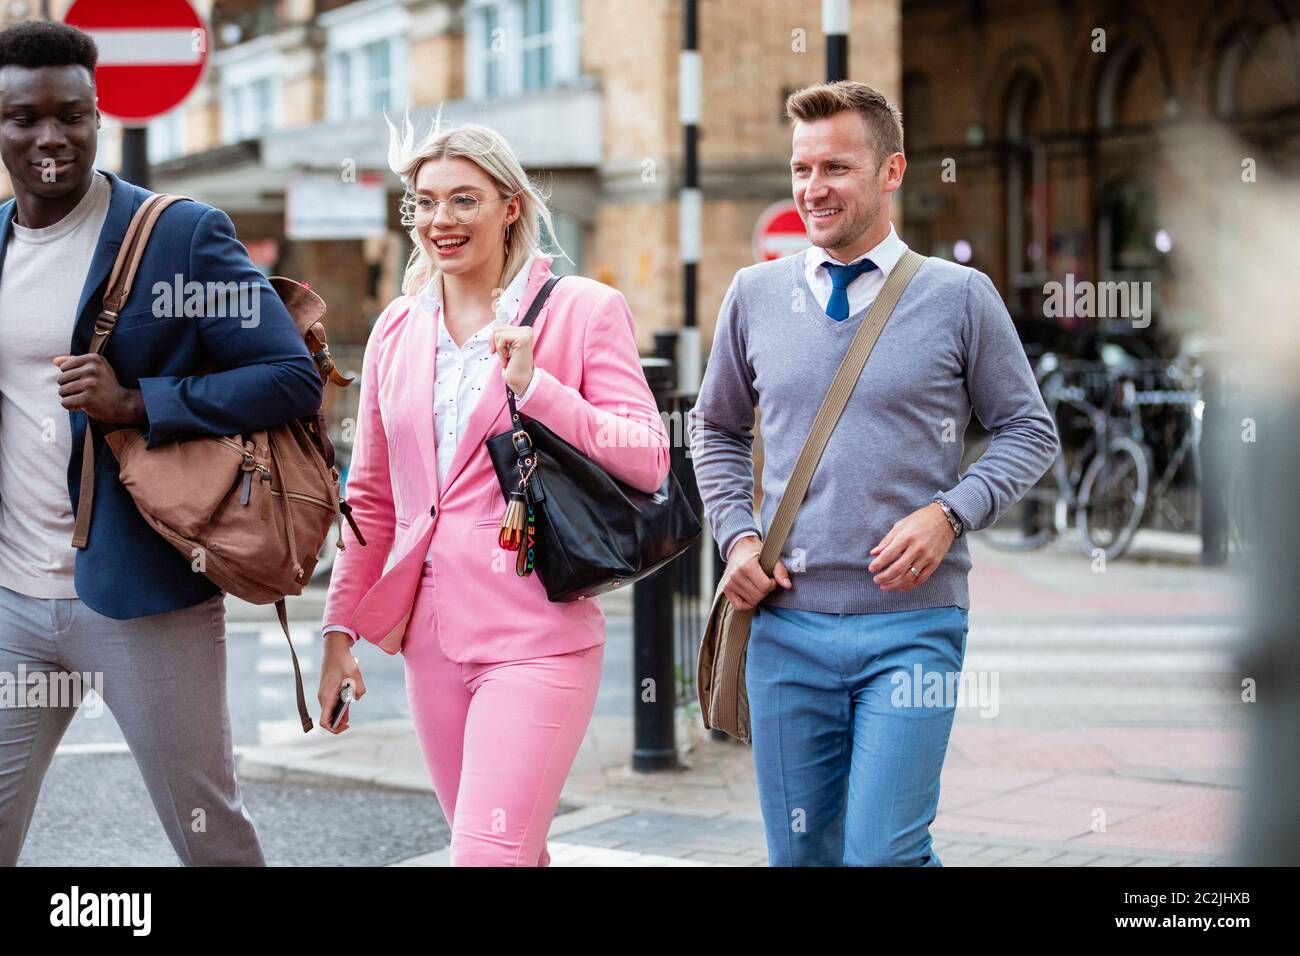 A businesswoman walking with two businessmen home from work through the city. Stock Photo